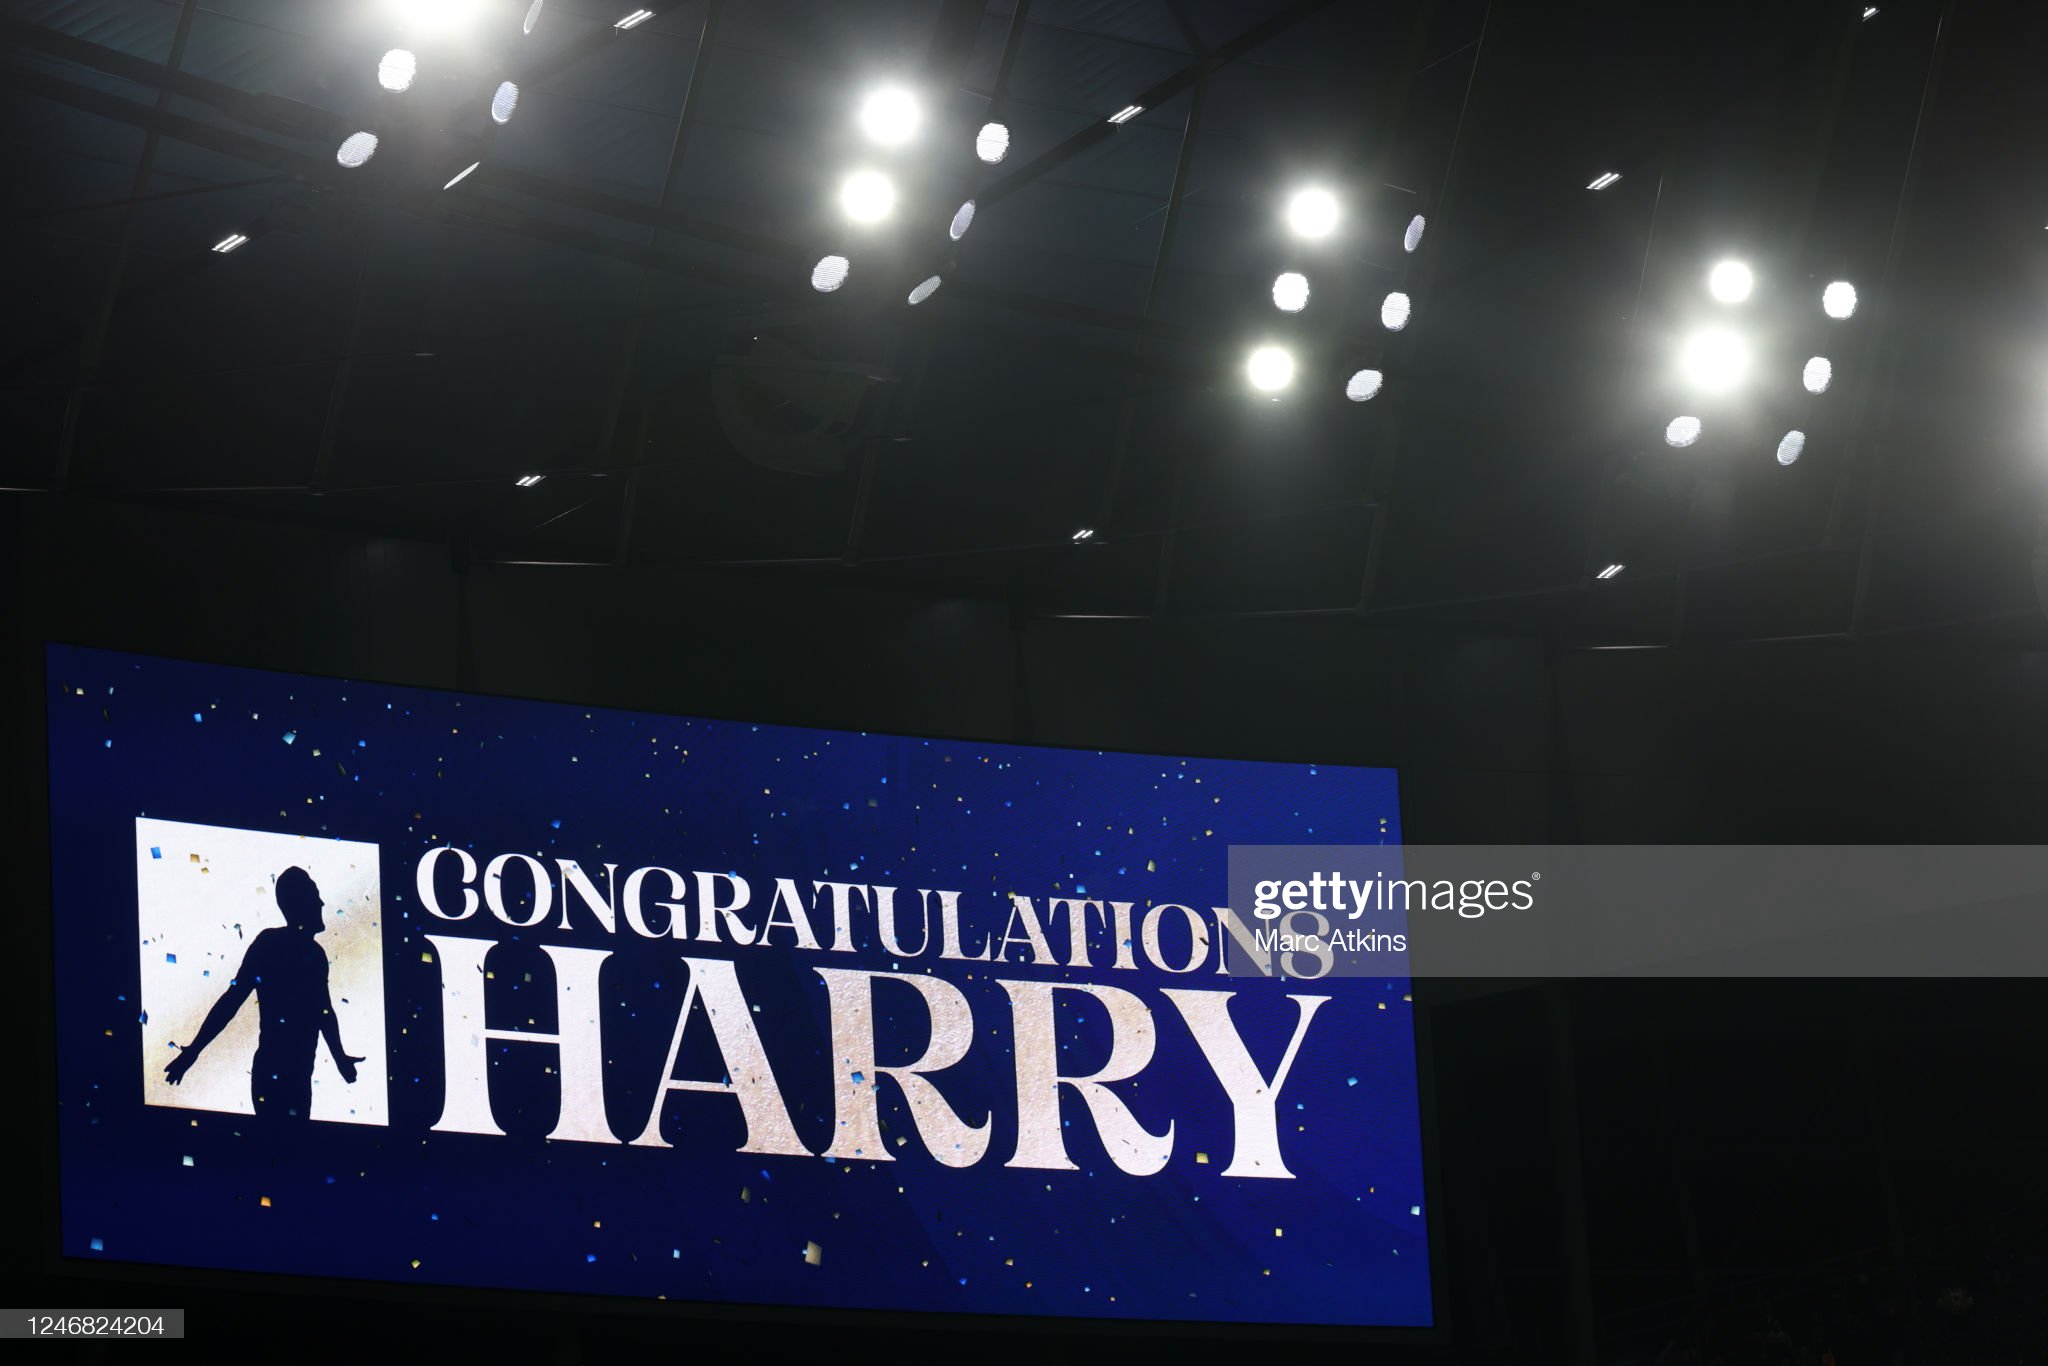 gettyimages-1246824204-2048x2048.jpg